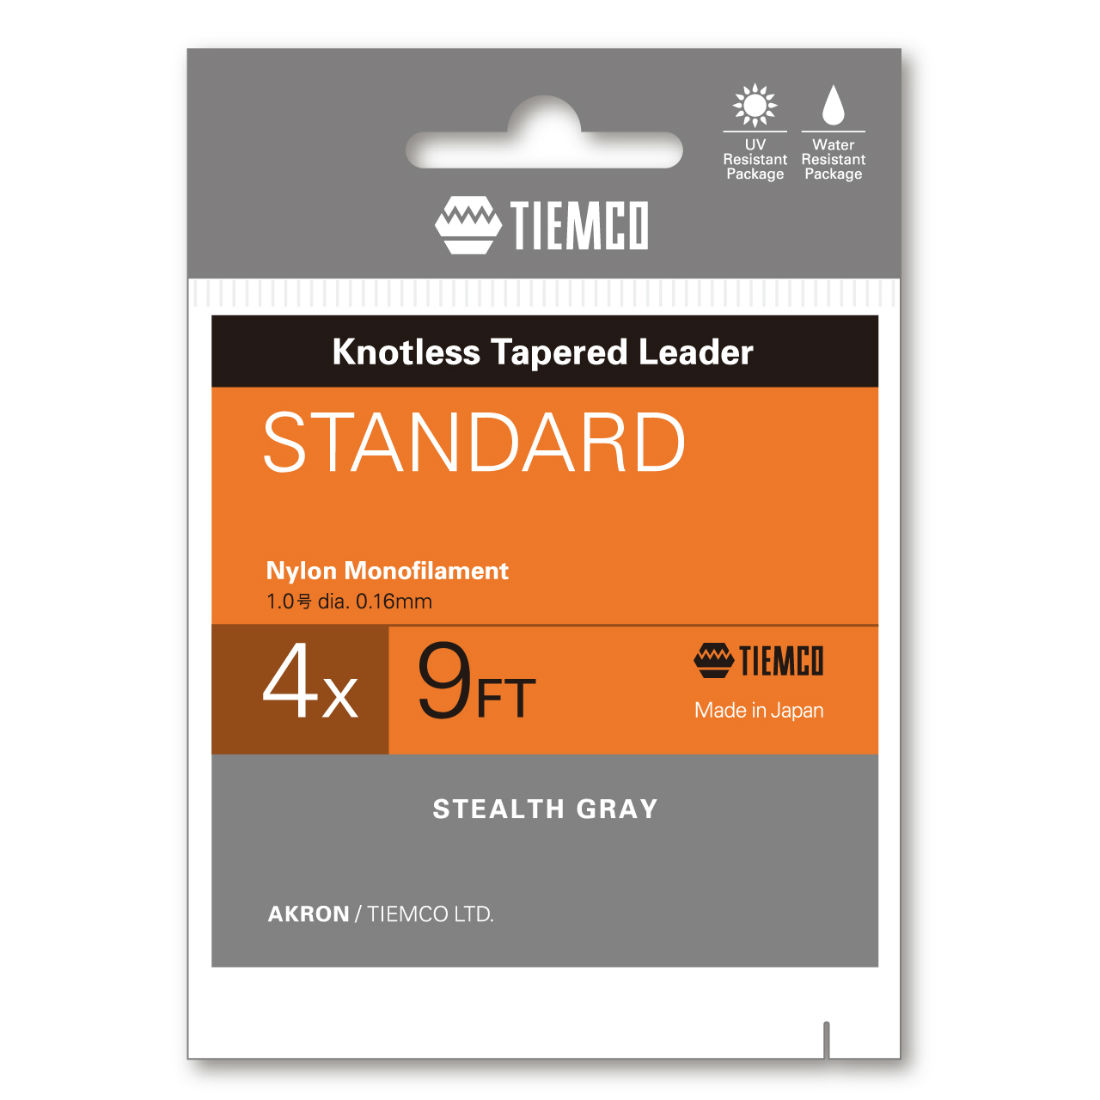 INAINTAS FLY TIEMCO STANDARD TAPERED LEADER 9ft 4X